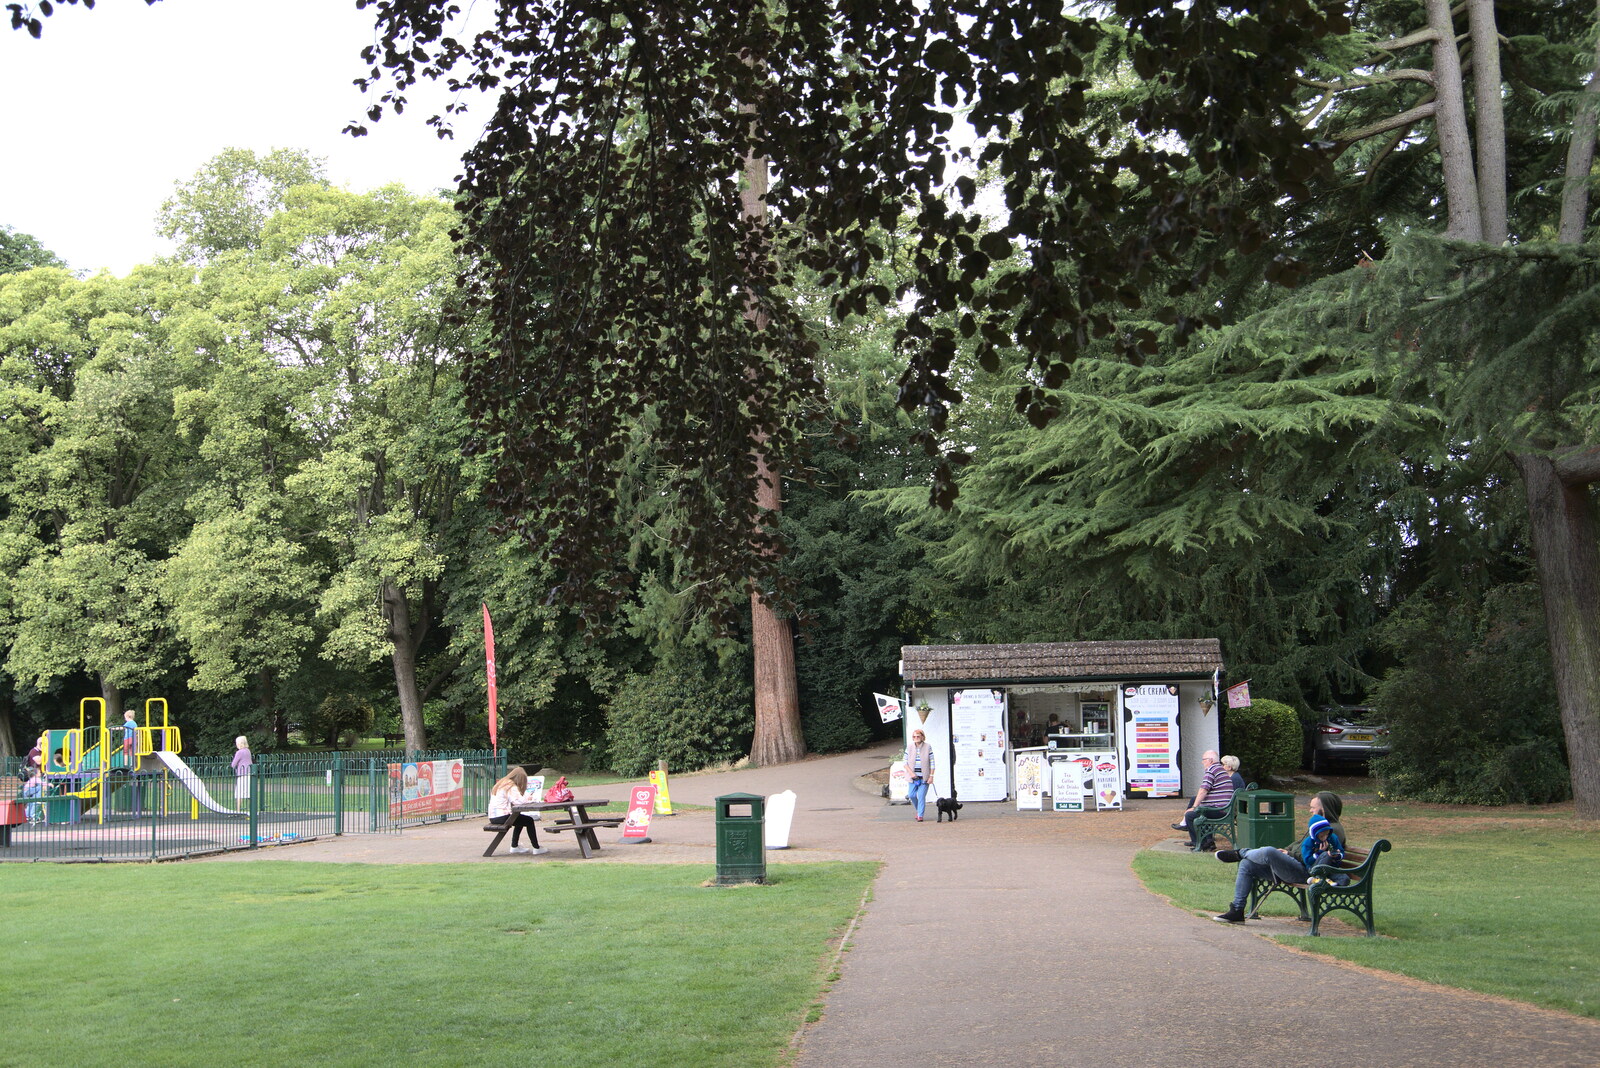 An ice-cream shop in the park from Pork Pies and Dockside Dereliction, Melton Mowbray and Liverpool - 7th August 2021